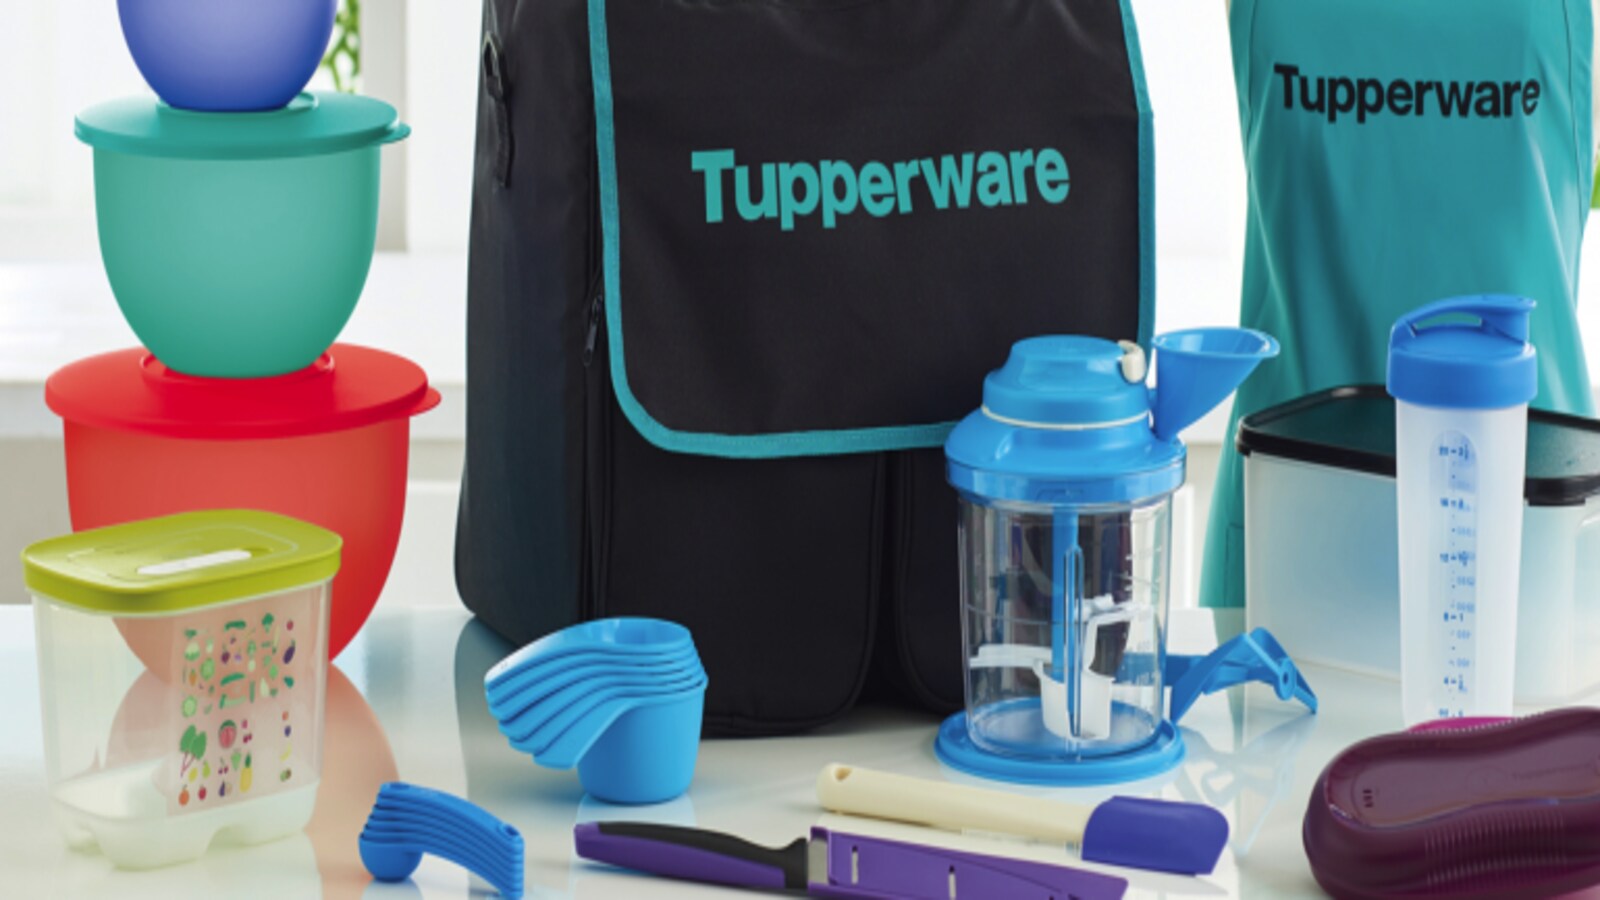 Tupperware launches 10 new stores despite COVID challenges